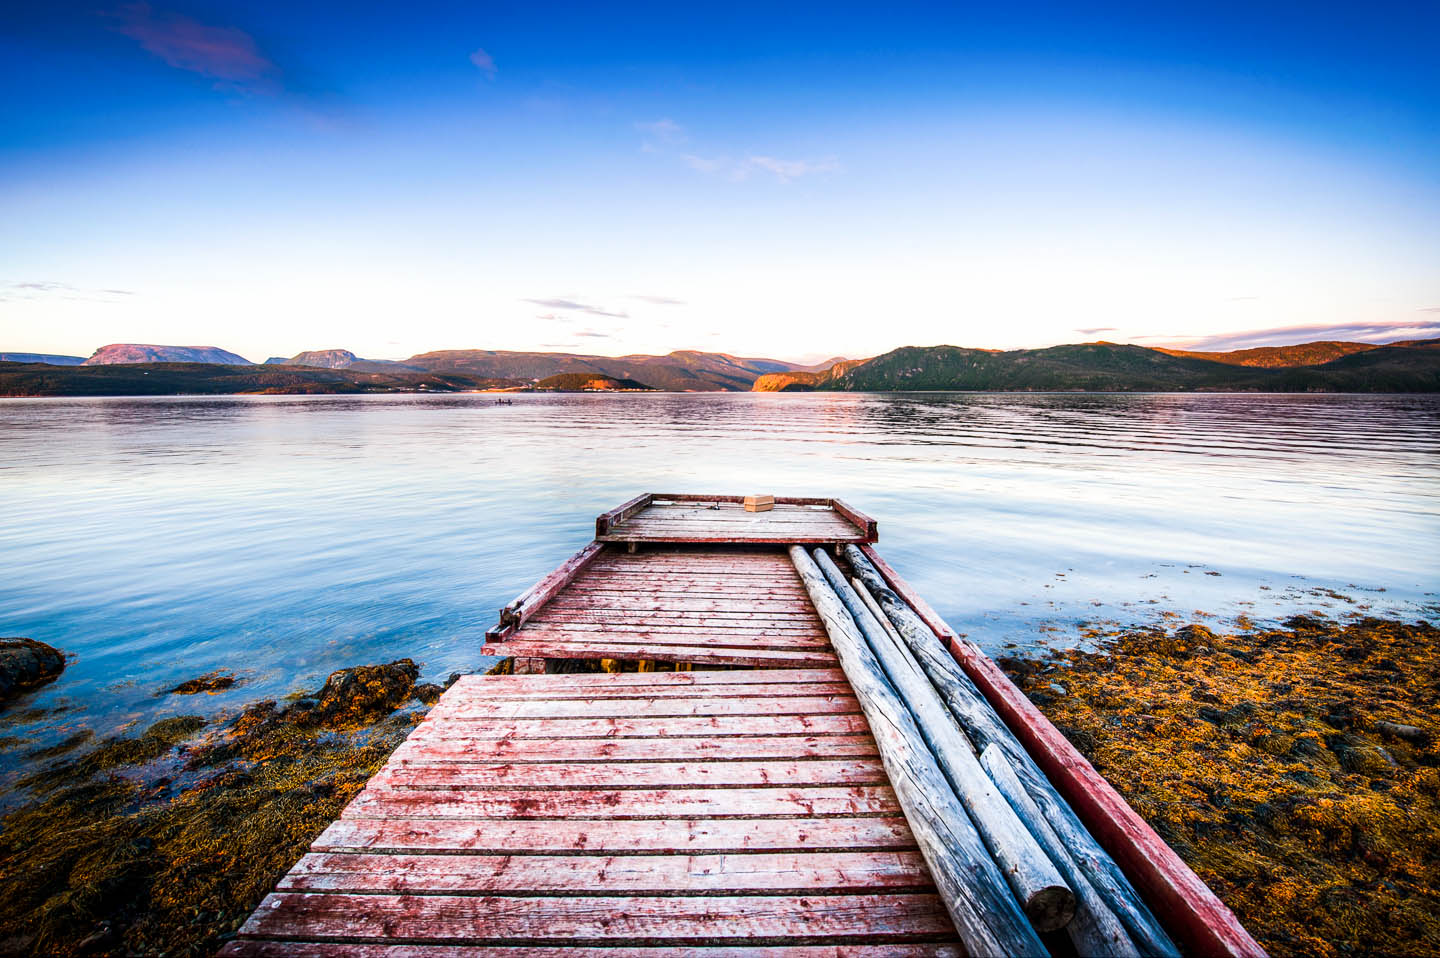 This is a photograph of an old wharf in Curzon Village which lays at the entrance to Bonne Bay in Newfoundland. In the distance you can see Rocky Harbour and Norris Point. If you’re looking for a colorful photo of Newfoundland, then you’ve found it. The pinks and blue hues together combine for some awesome eye candy.